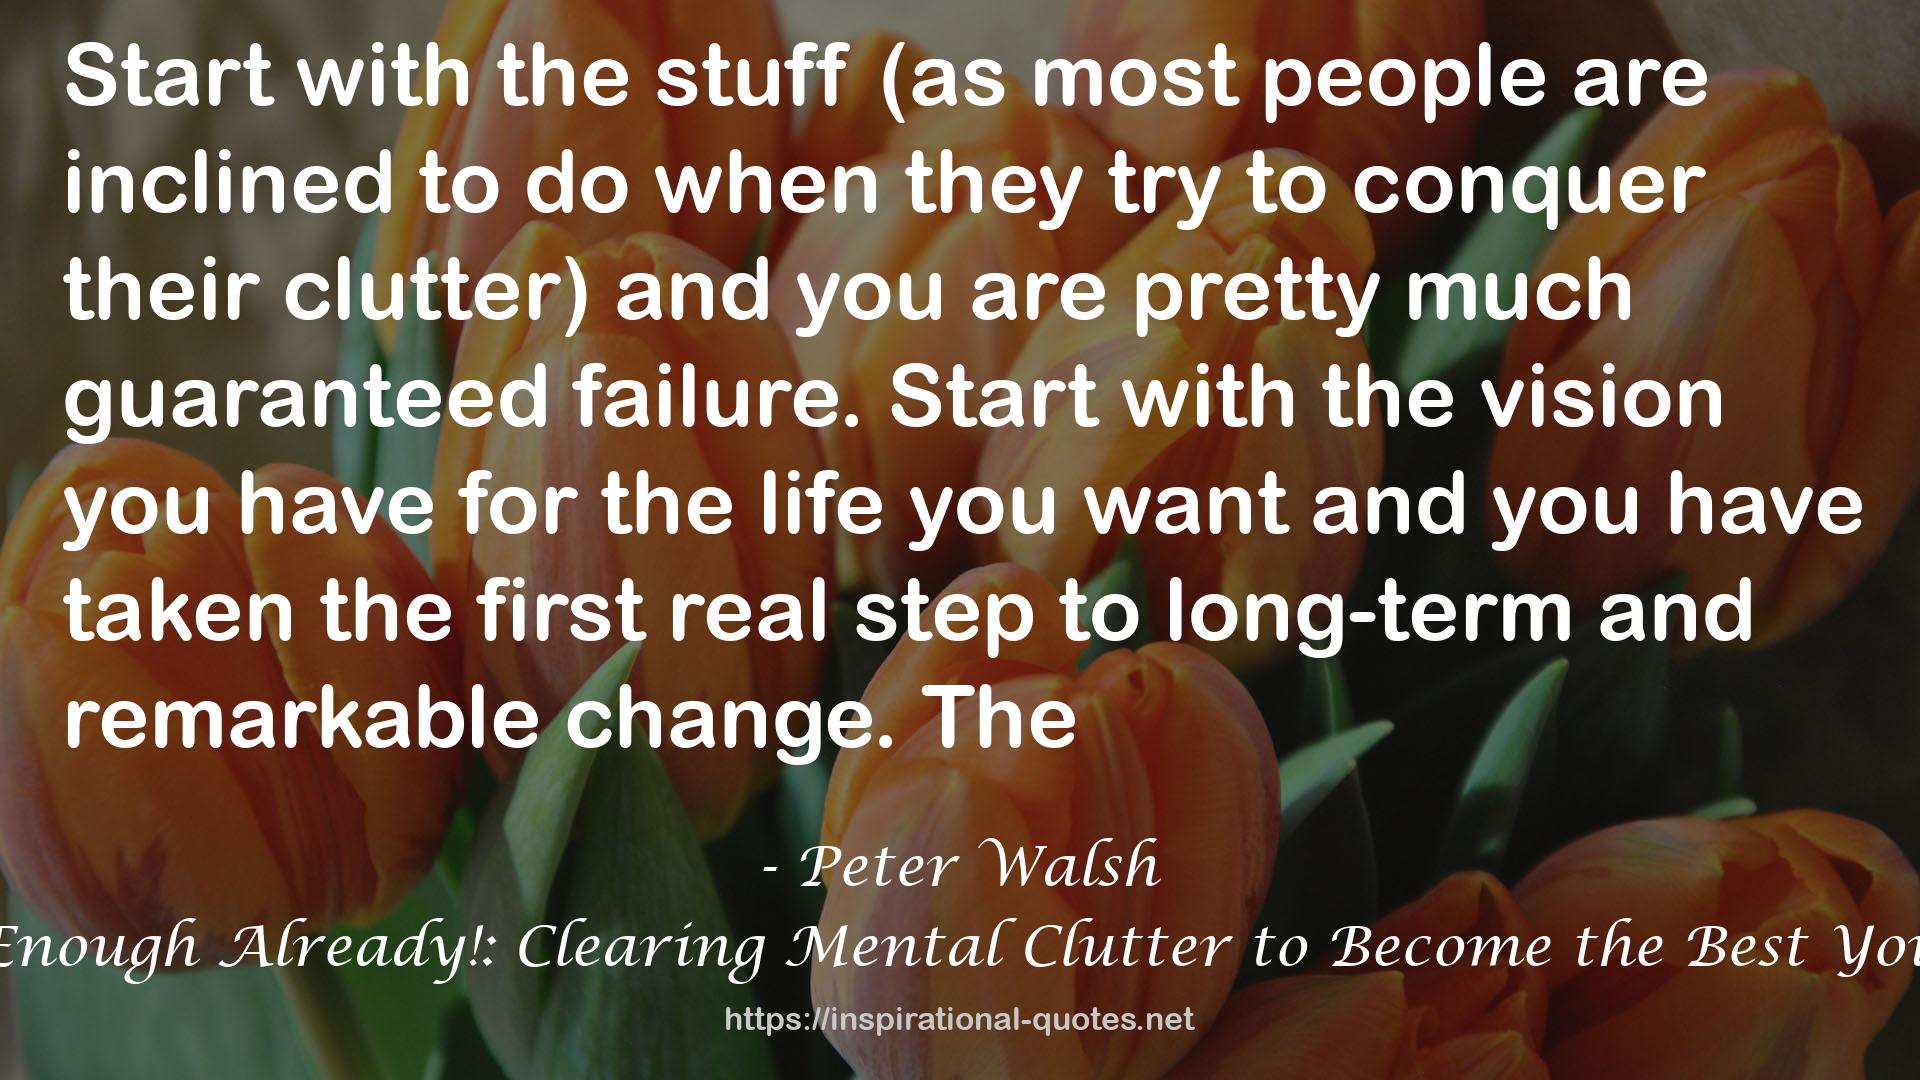 Enough Already!: Clearing Mental Clutter to Become the Best You QUOTES